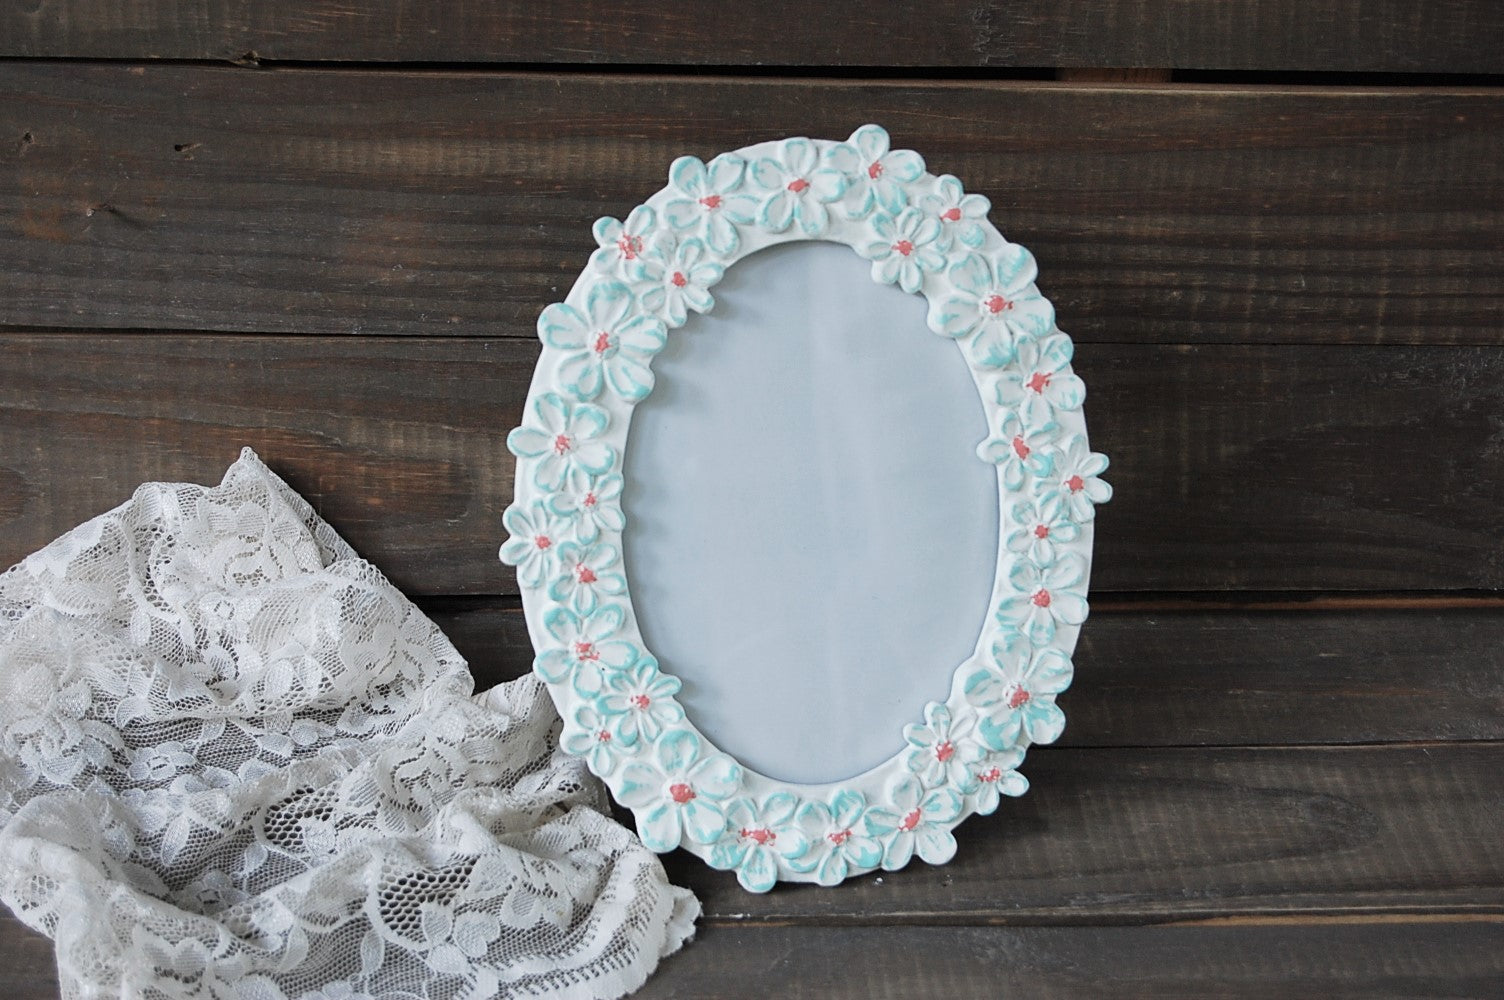 Mint & coral daisy frame - The Vintage Artistry